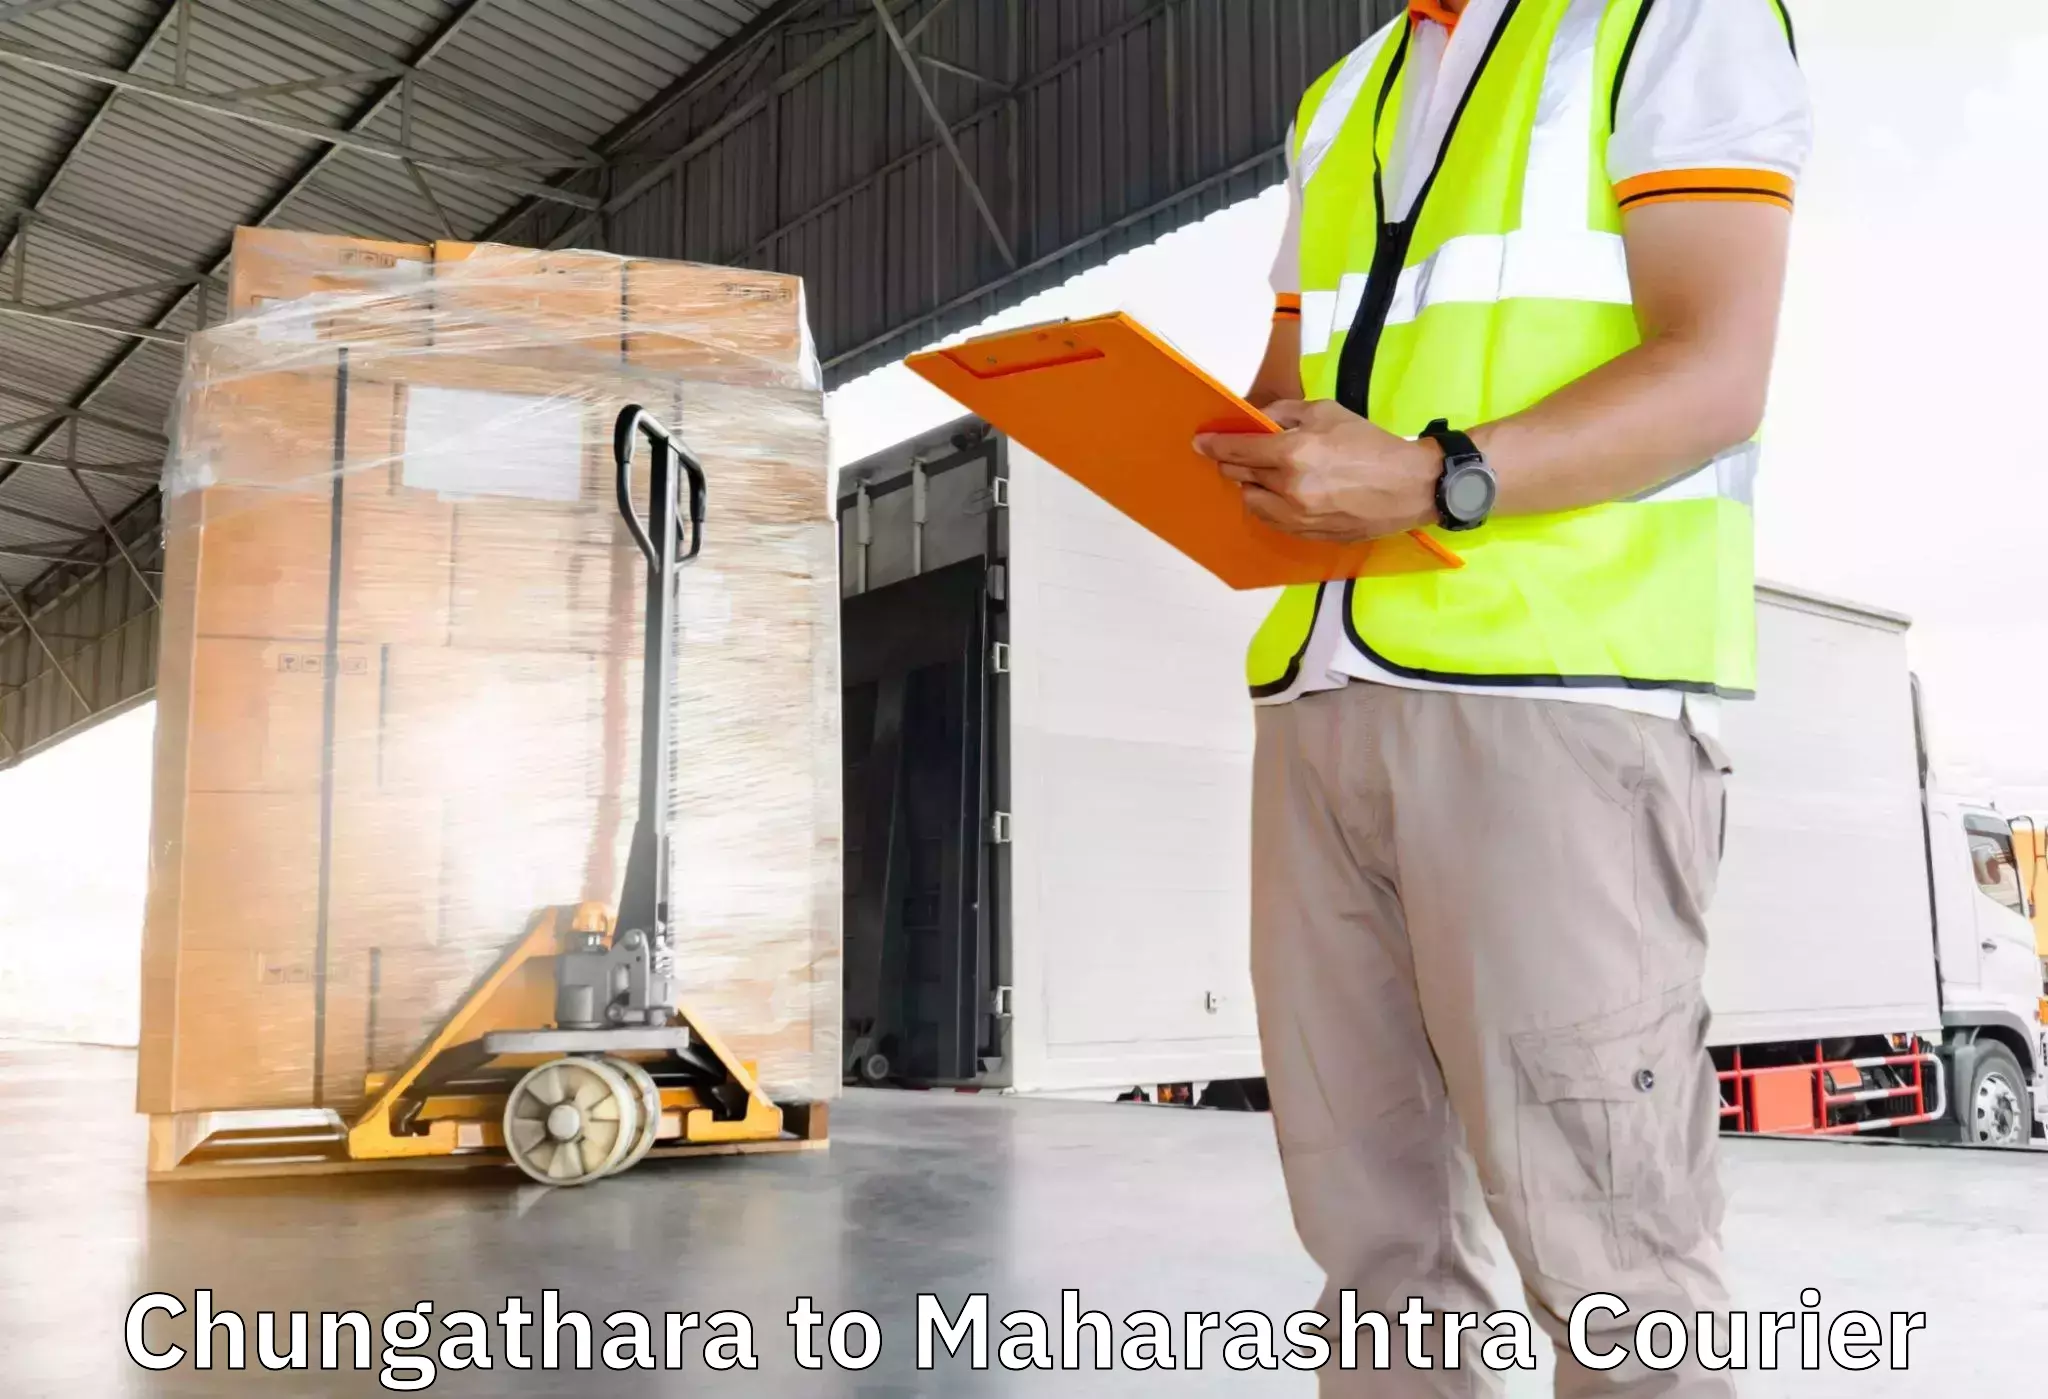 Hassle-free relocation Chungathara to Thane